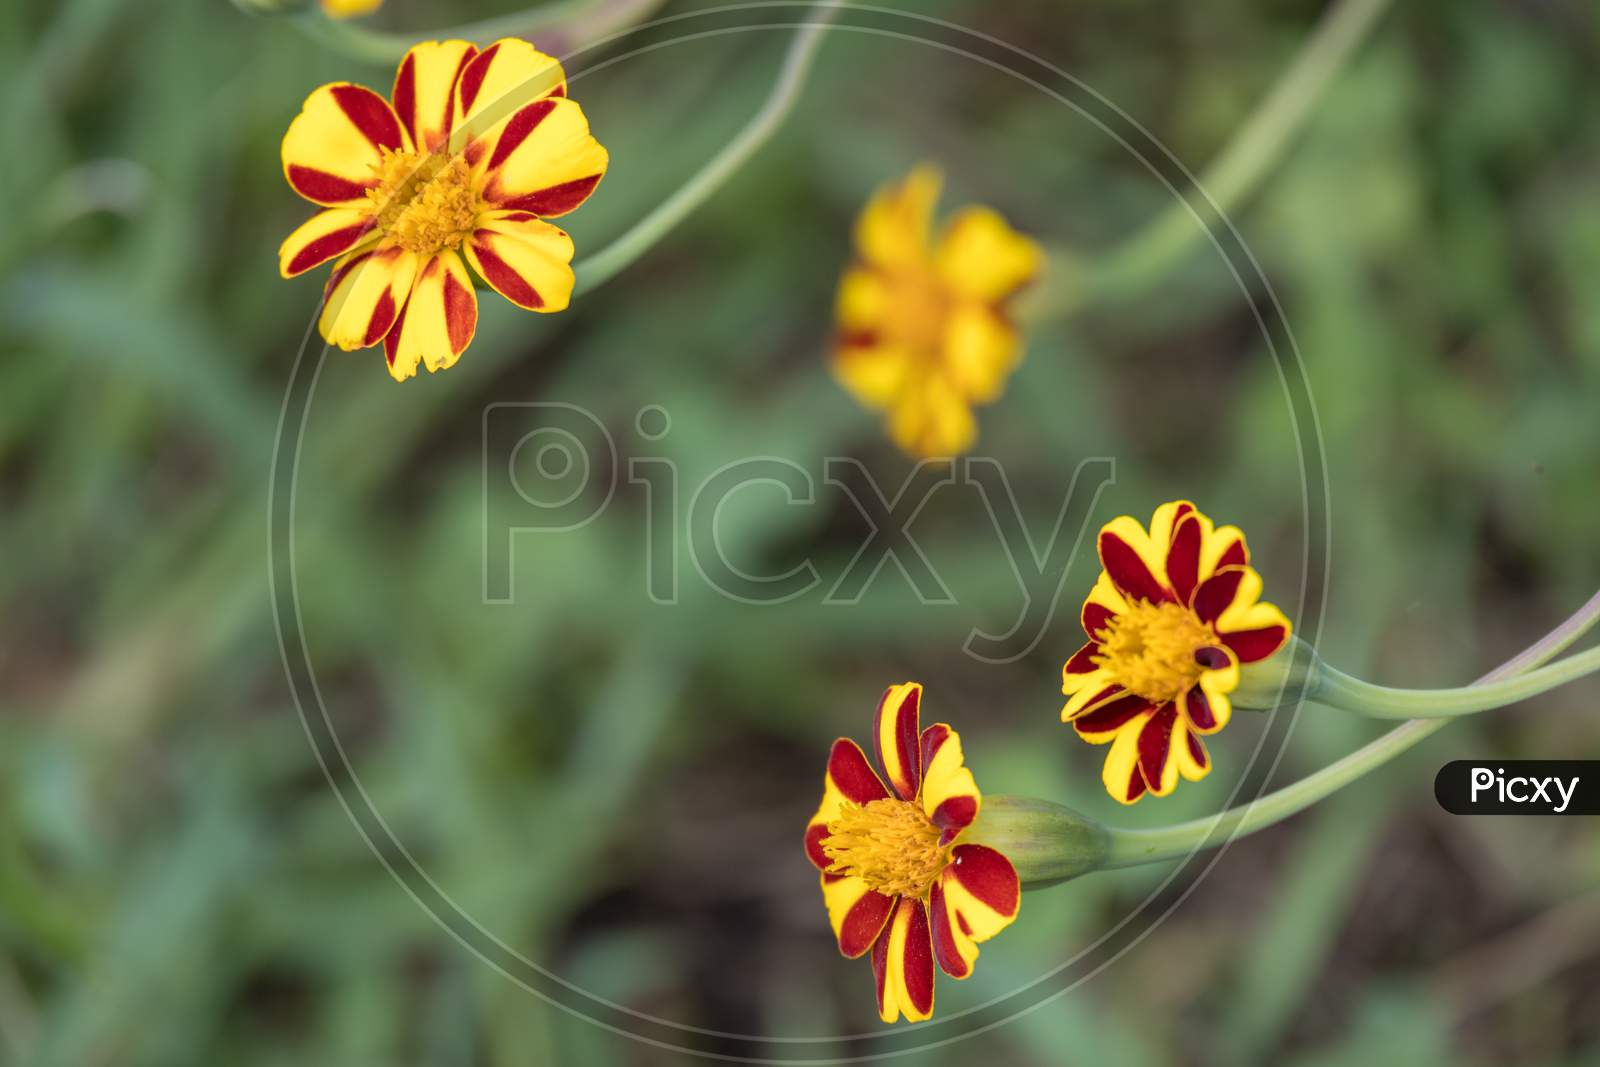 French Marigold (Tagetes Patula) Growing In A Garden In Italy